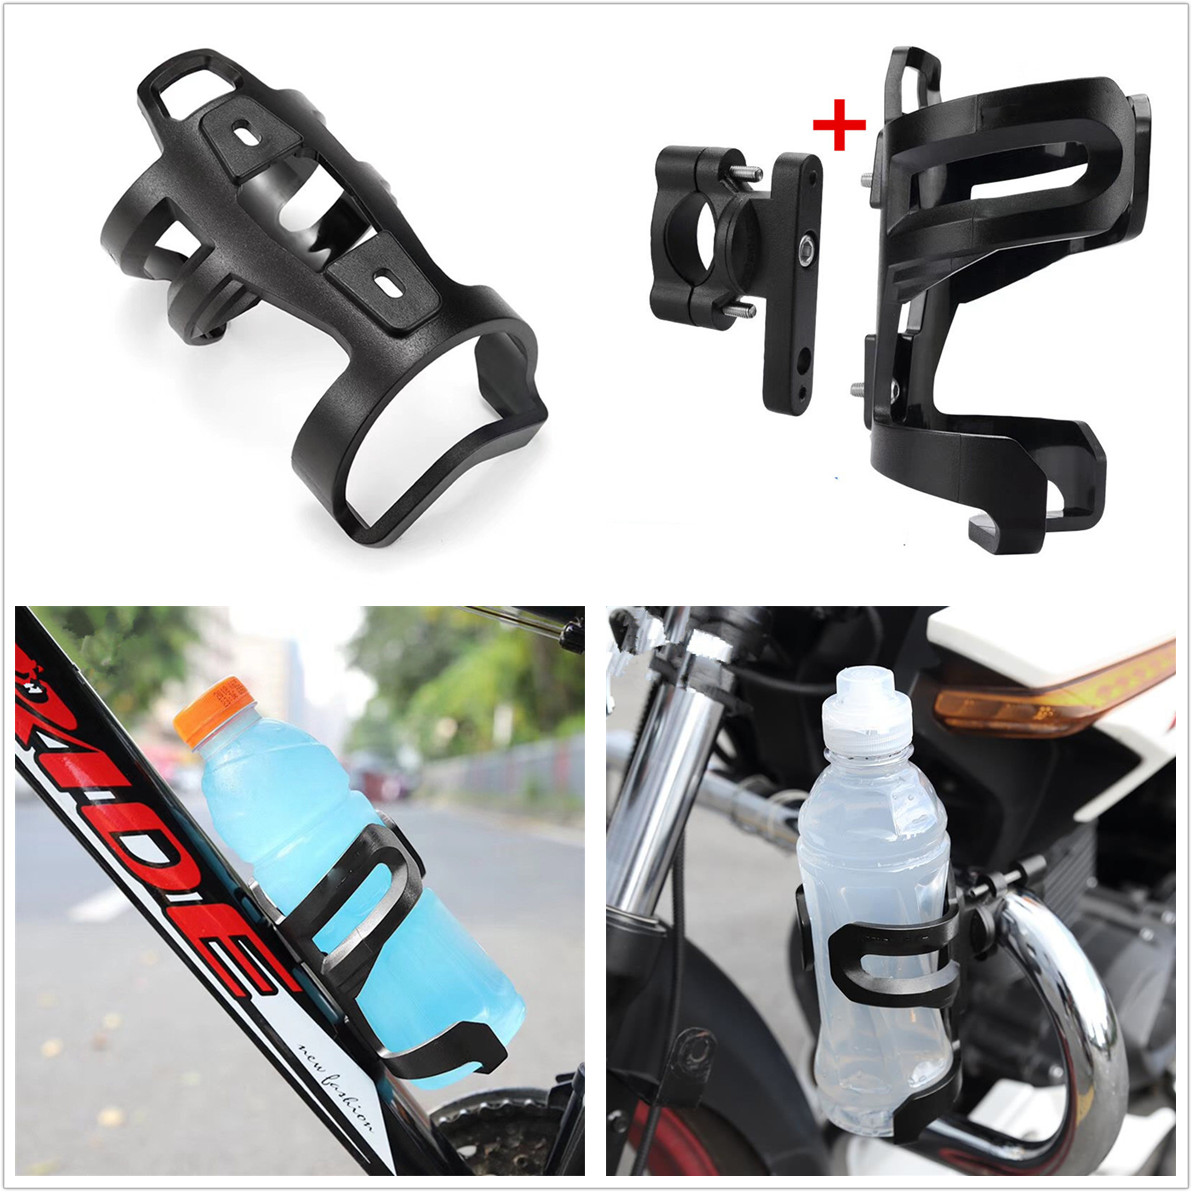 water bottle and cell phone holder for bike